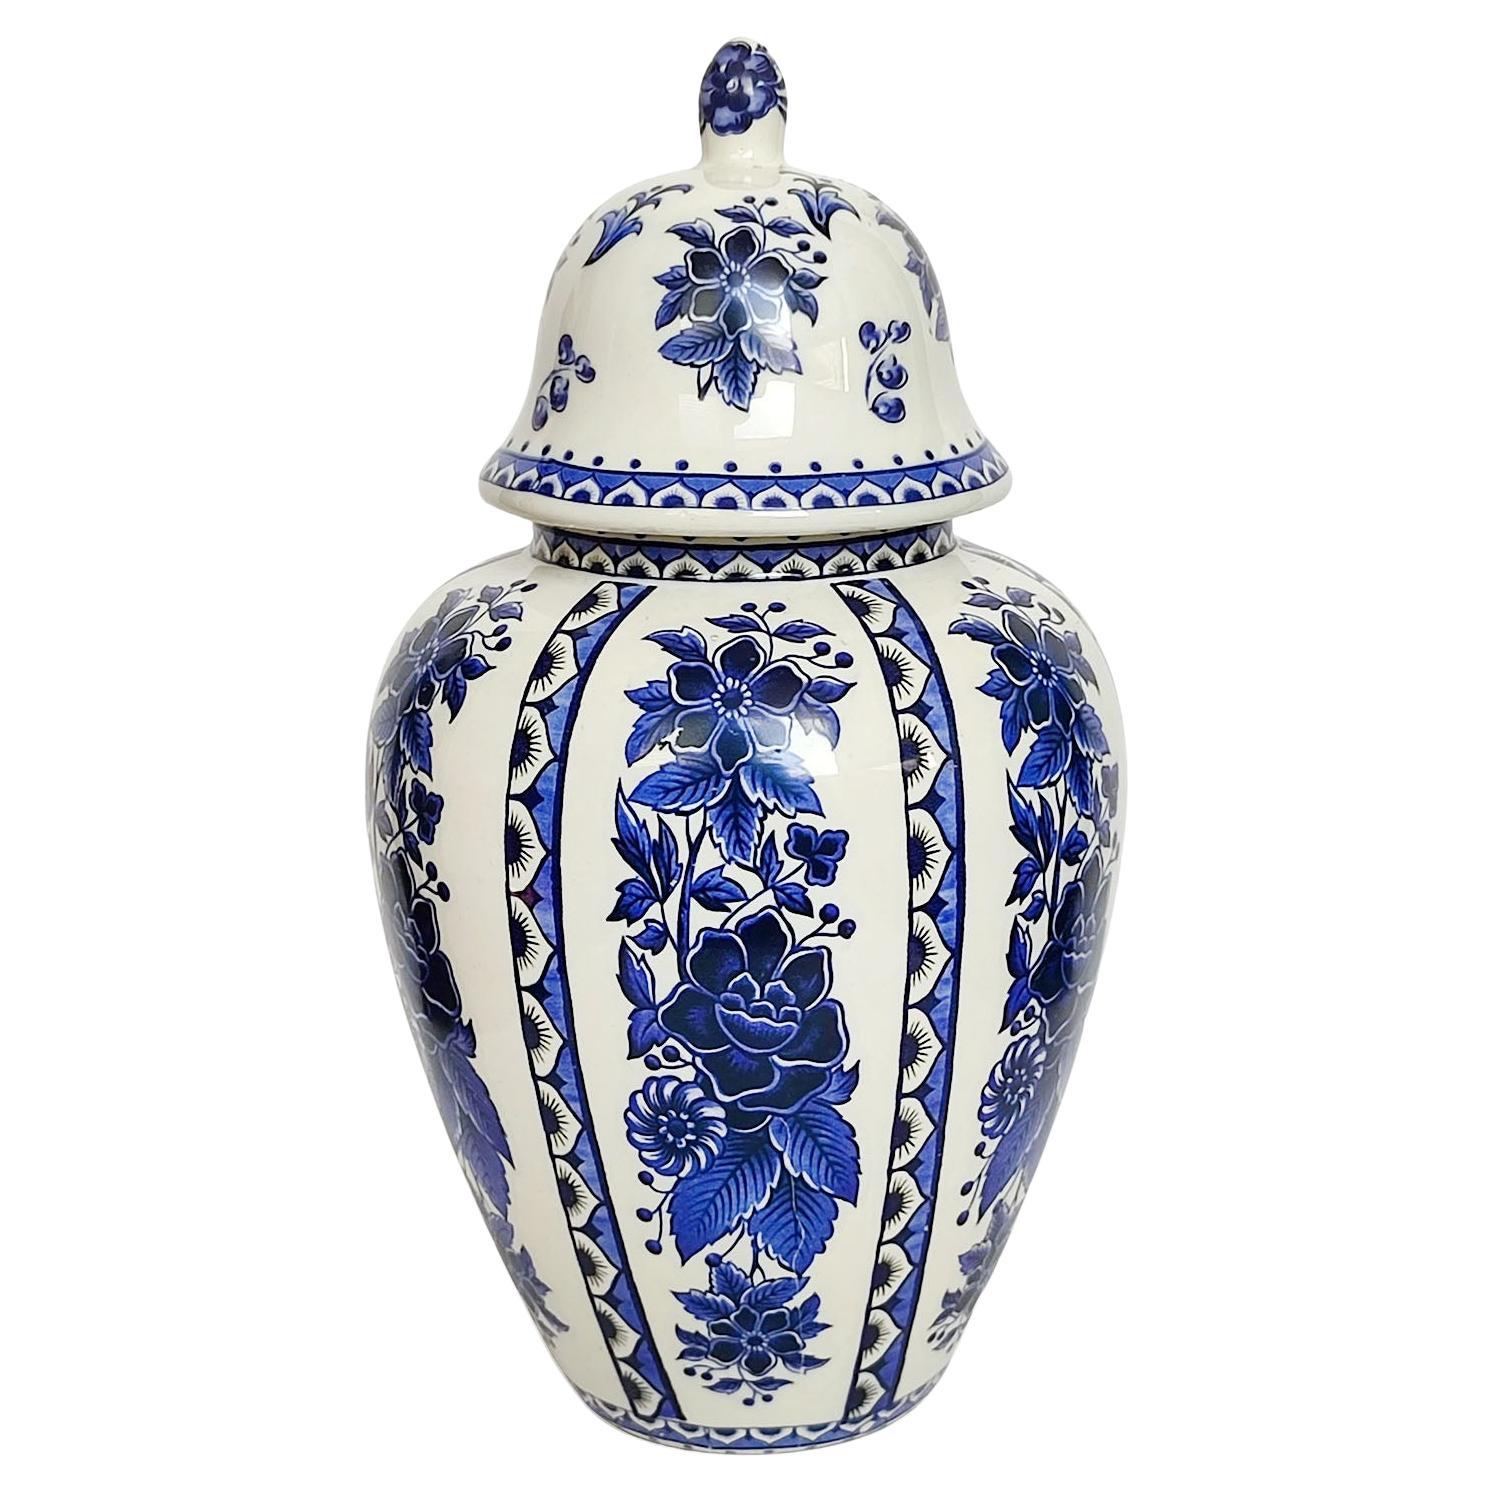 Vintage Large Delft Vase with Lid, White Glaze with Blue Decor, Free Shipping